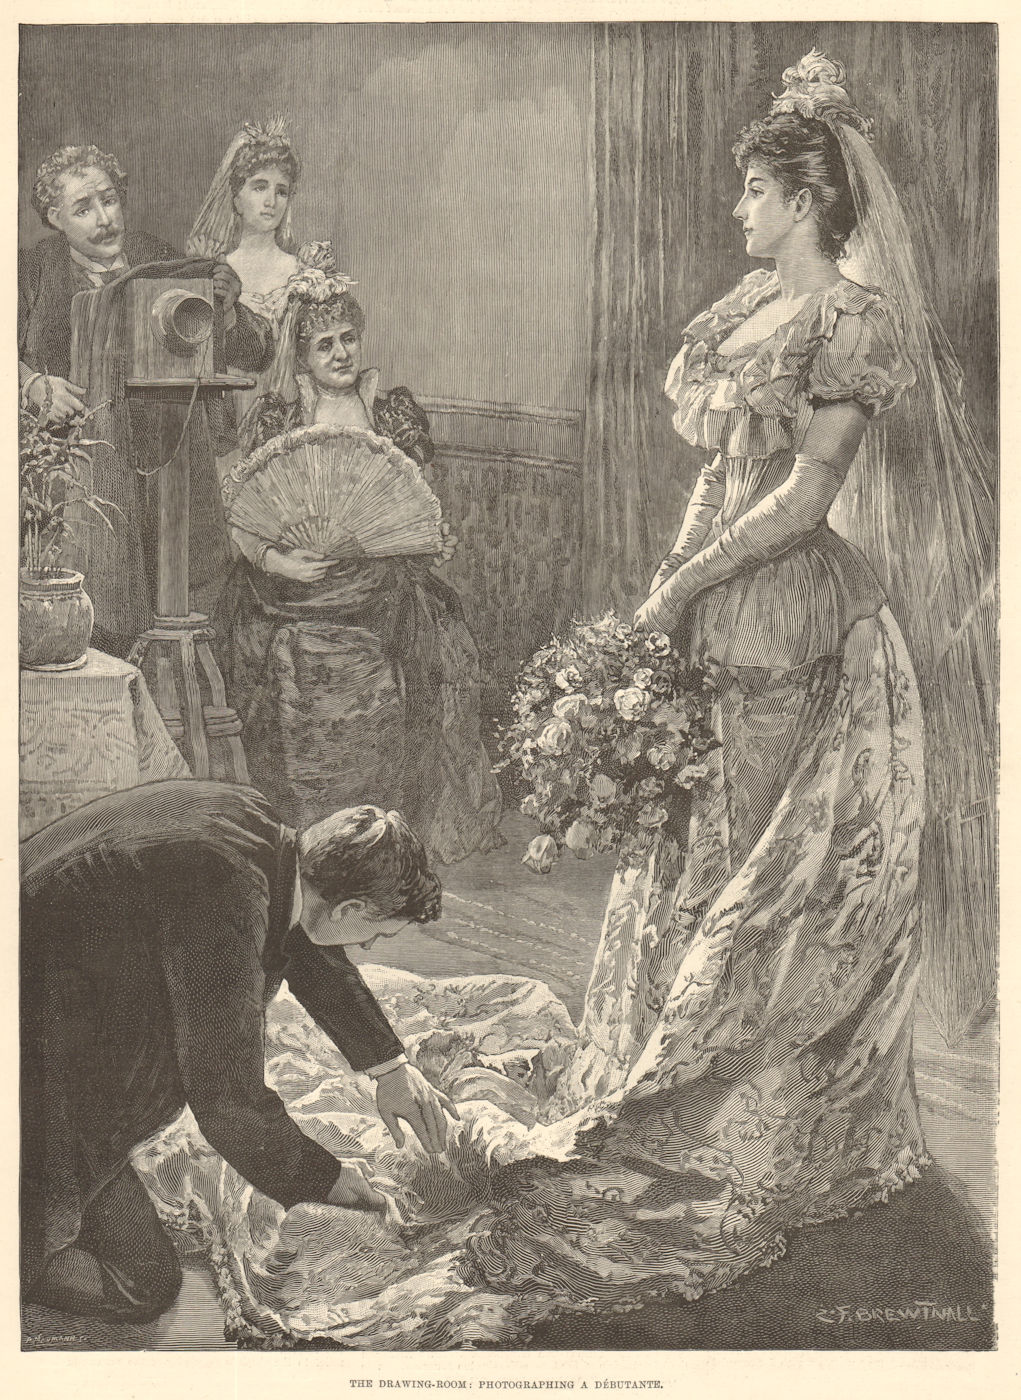 Associate Product The drawing-room: Photographing a debutante. Pretty Ladies. Fine arts 1893